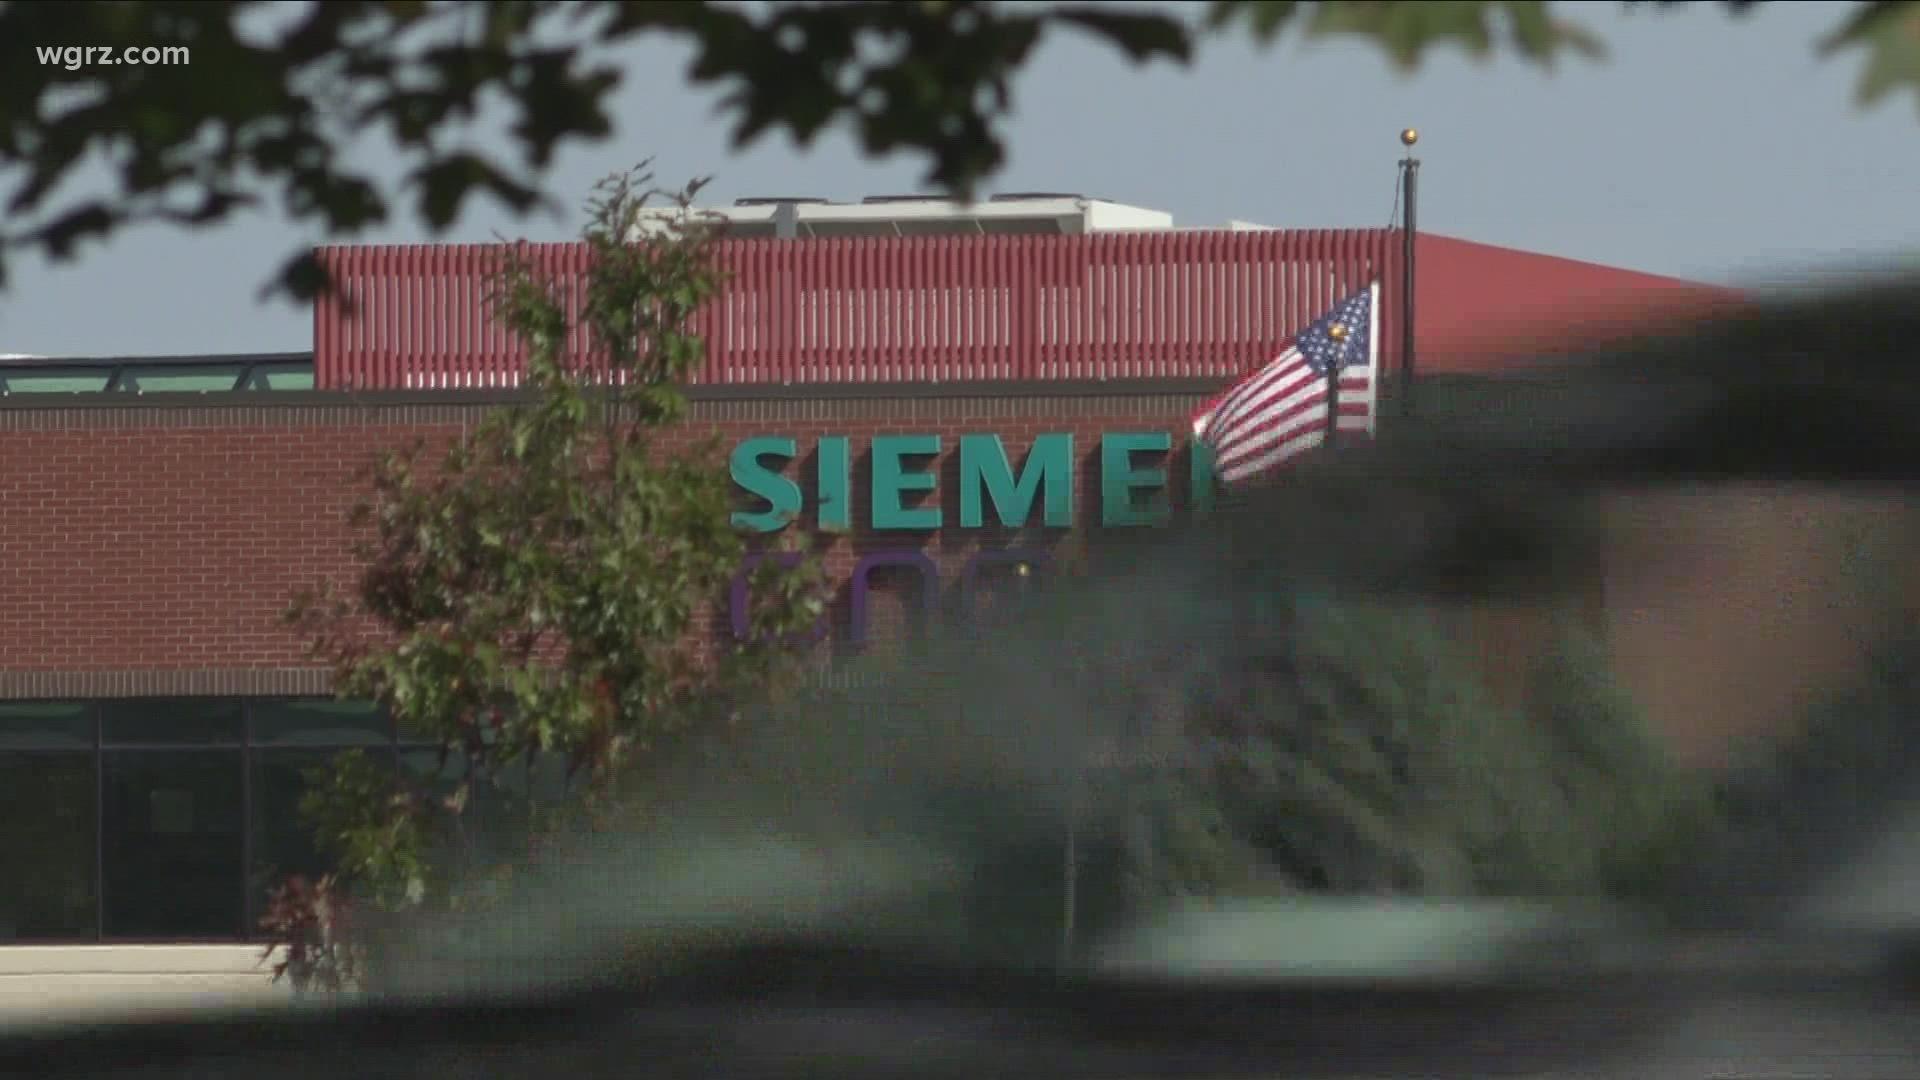 Senator Chuck Schumer stopped in Olean today to advocate for around a thousand employees at the Siemens Energy plant, who could soon be out of a job.